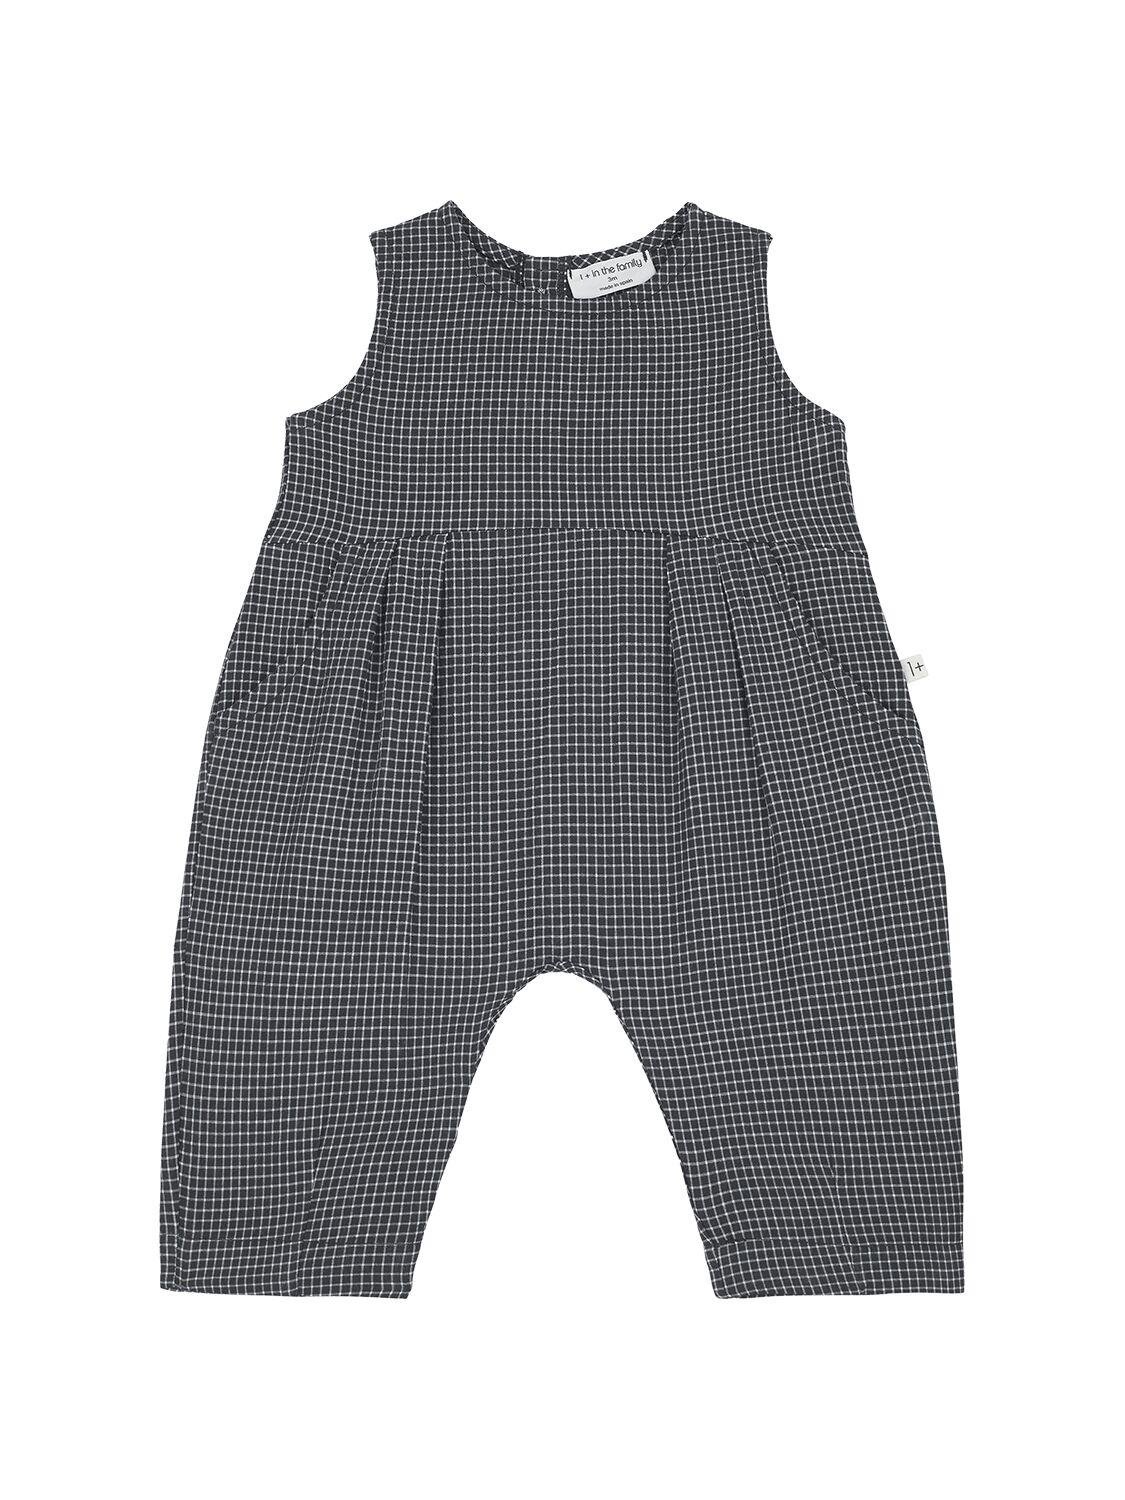 Cotton Seersucker Overalls by 1 + IN THE FAMILY